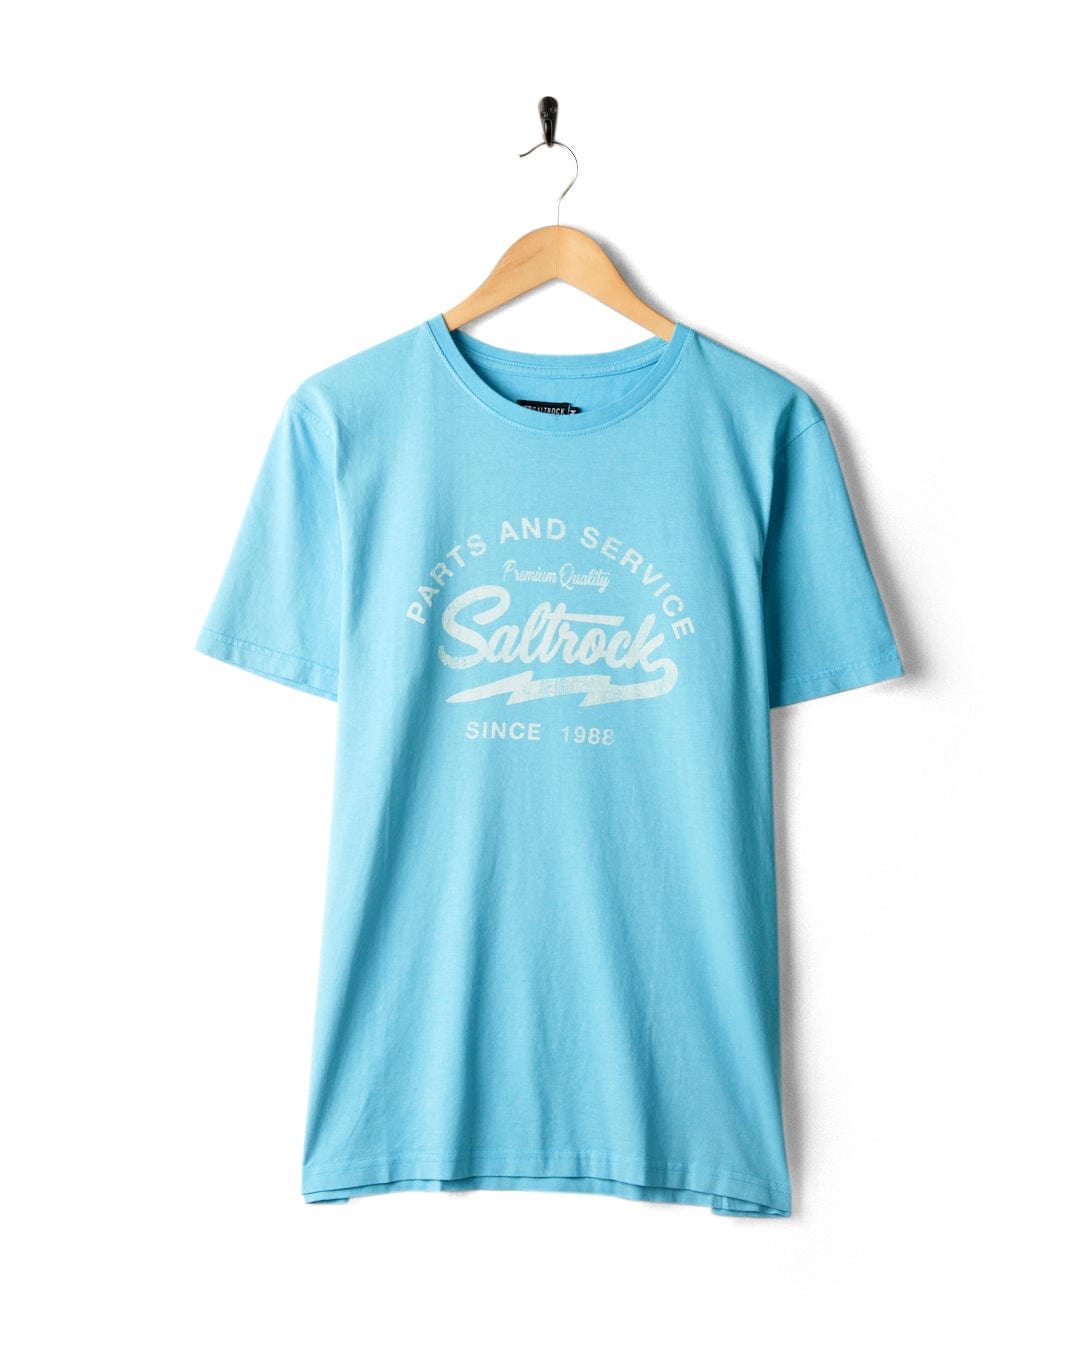 A Last Stop Motel - Mens T-Shirt - Light Blue with Saltrock branding hangs on a wall-mounted hook against a white background.